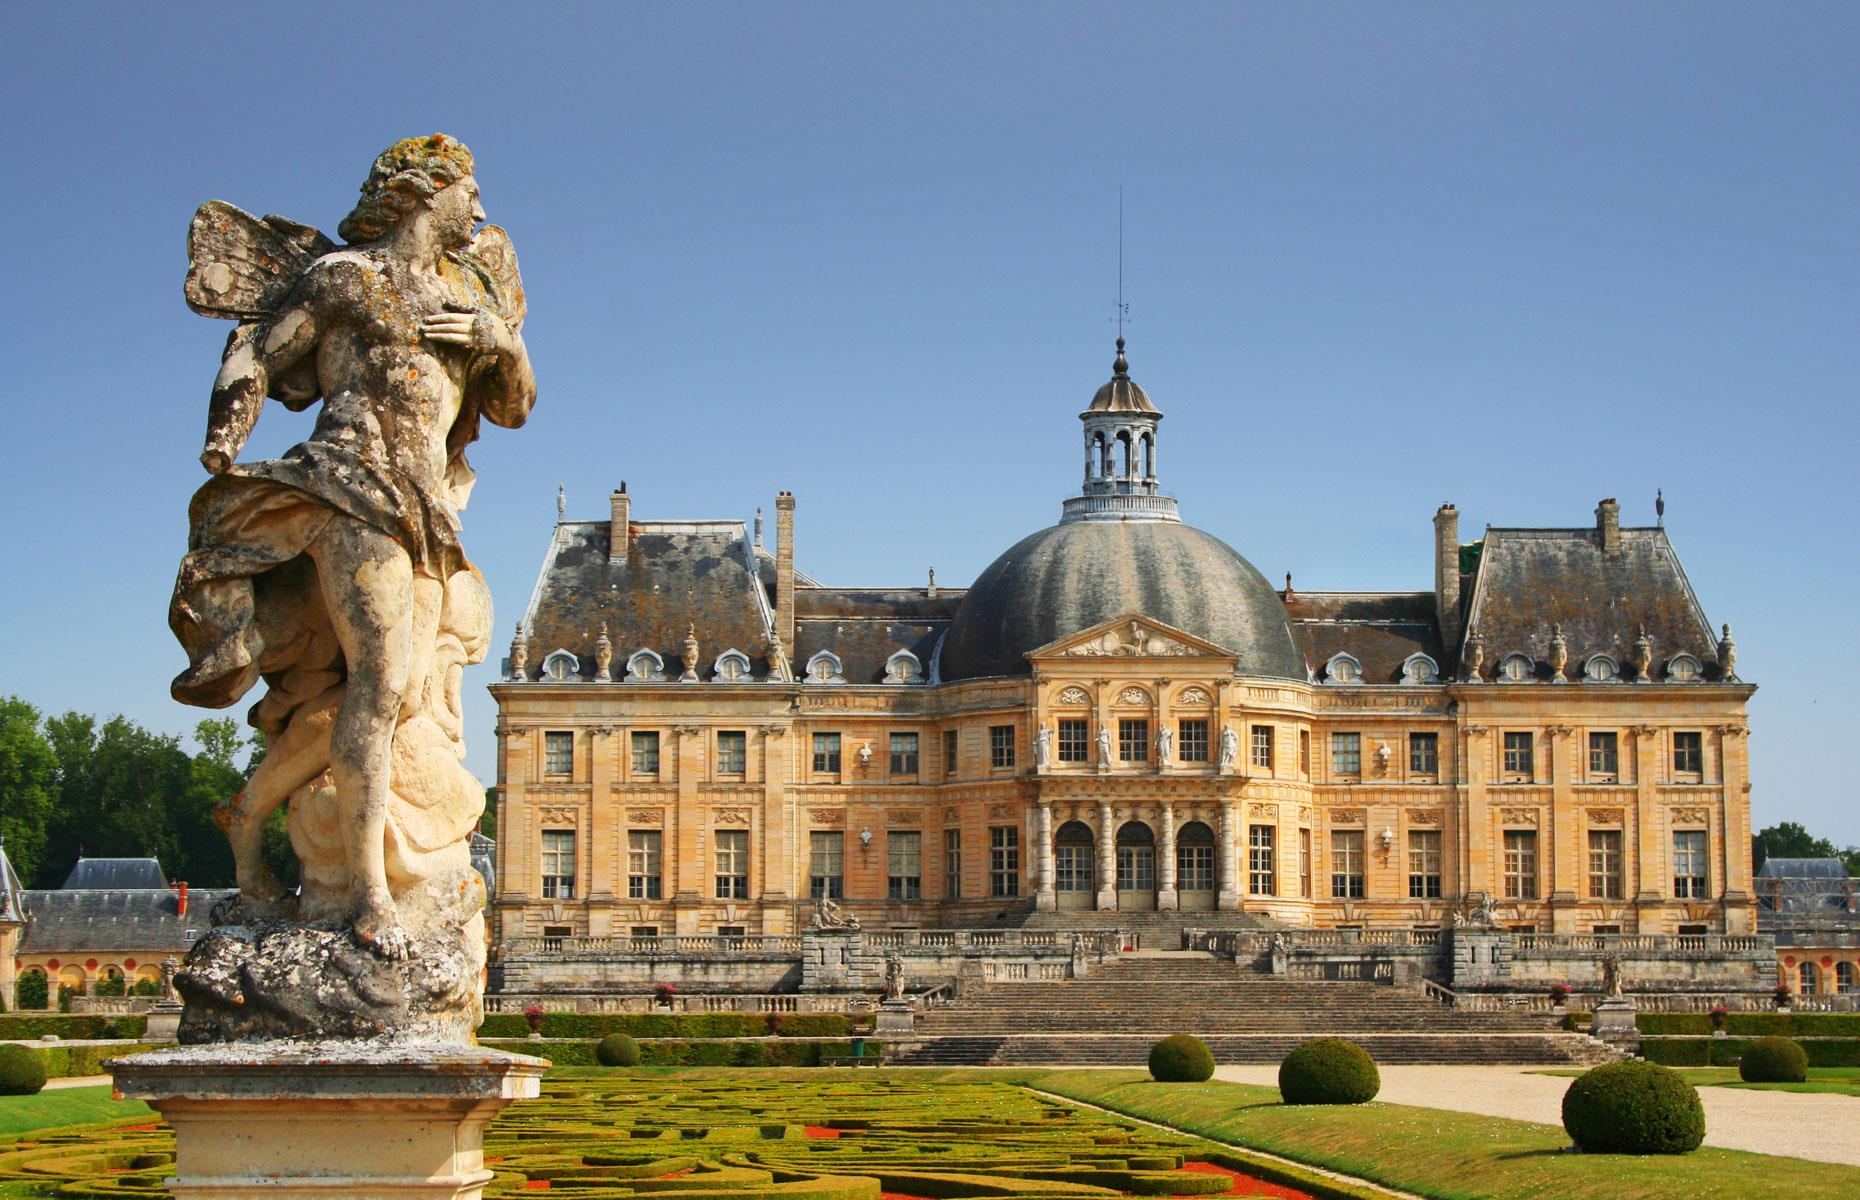 The French chateau treasures worth $2.2 million (£1.7m)